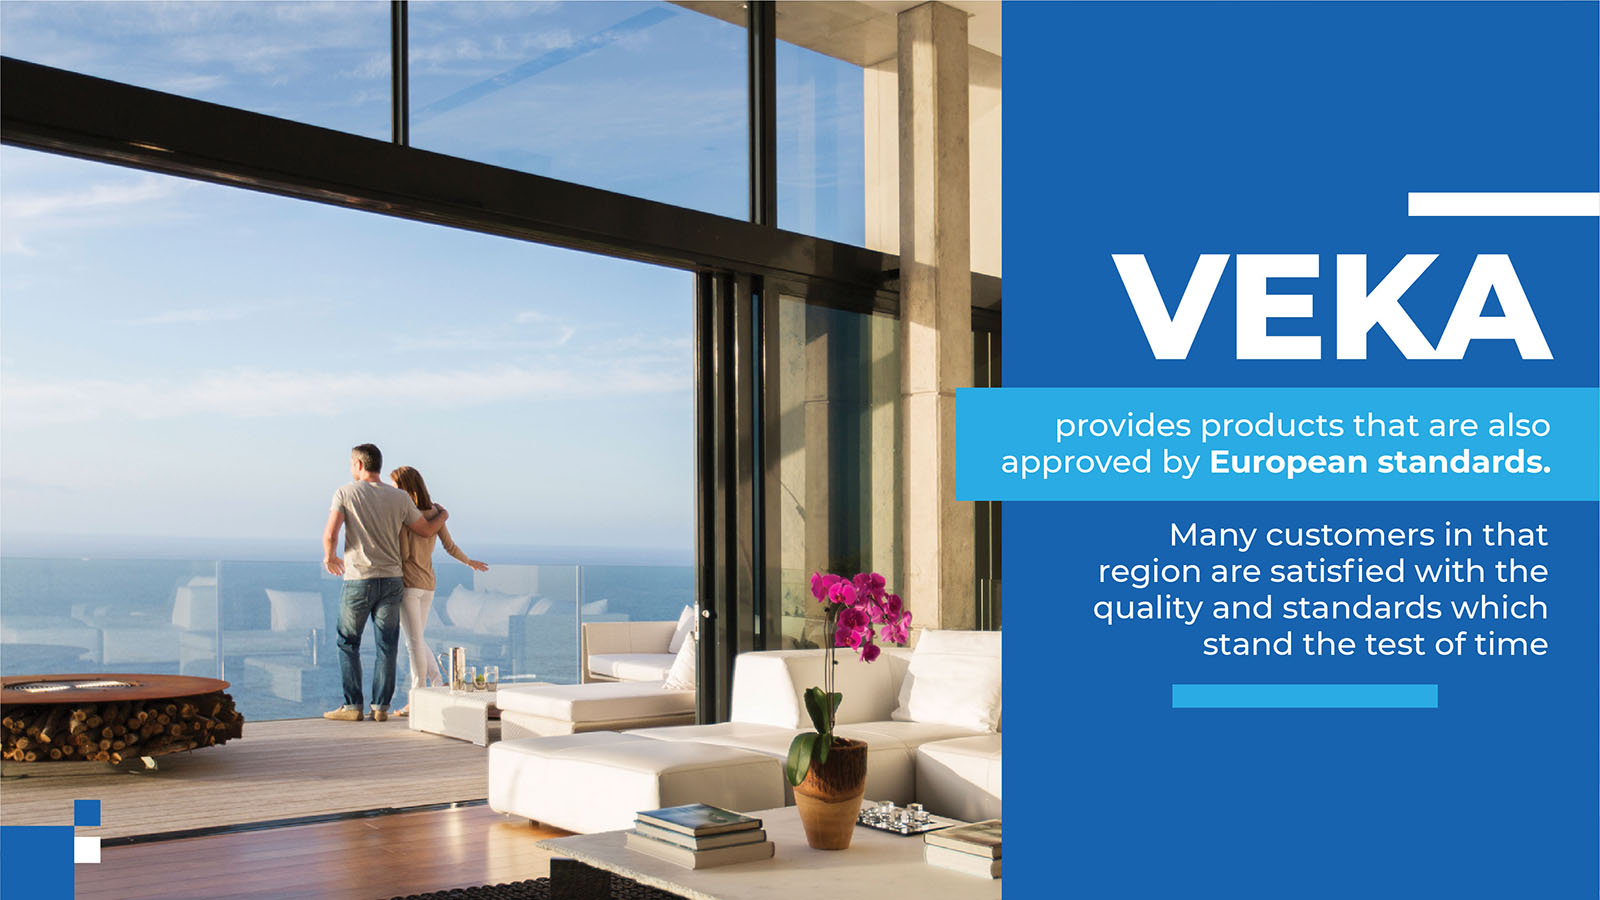 Veka provides products that are also approved by European standards. 